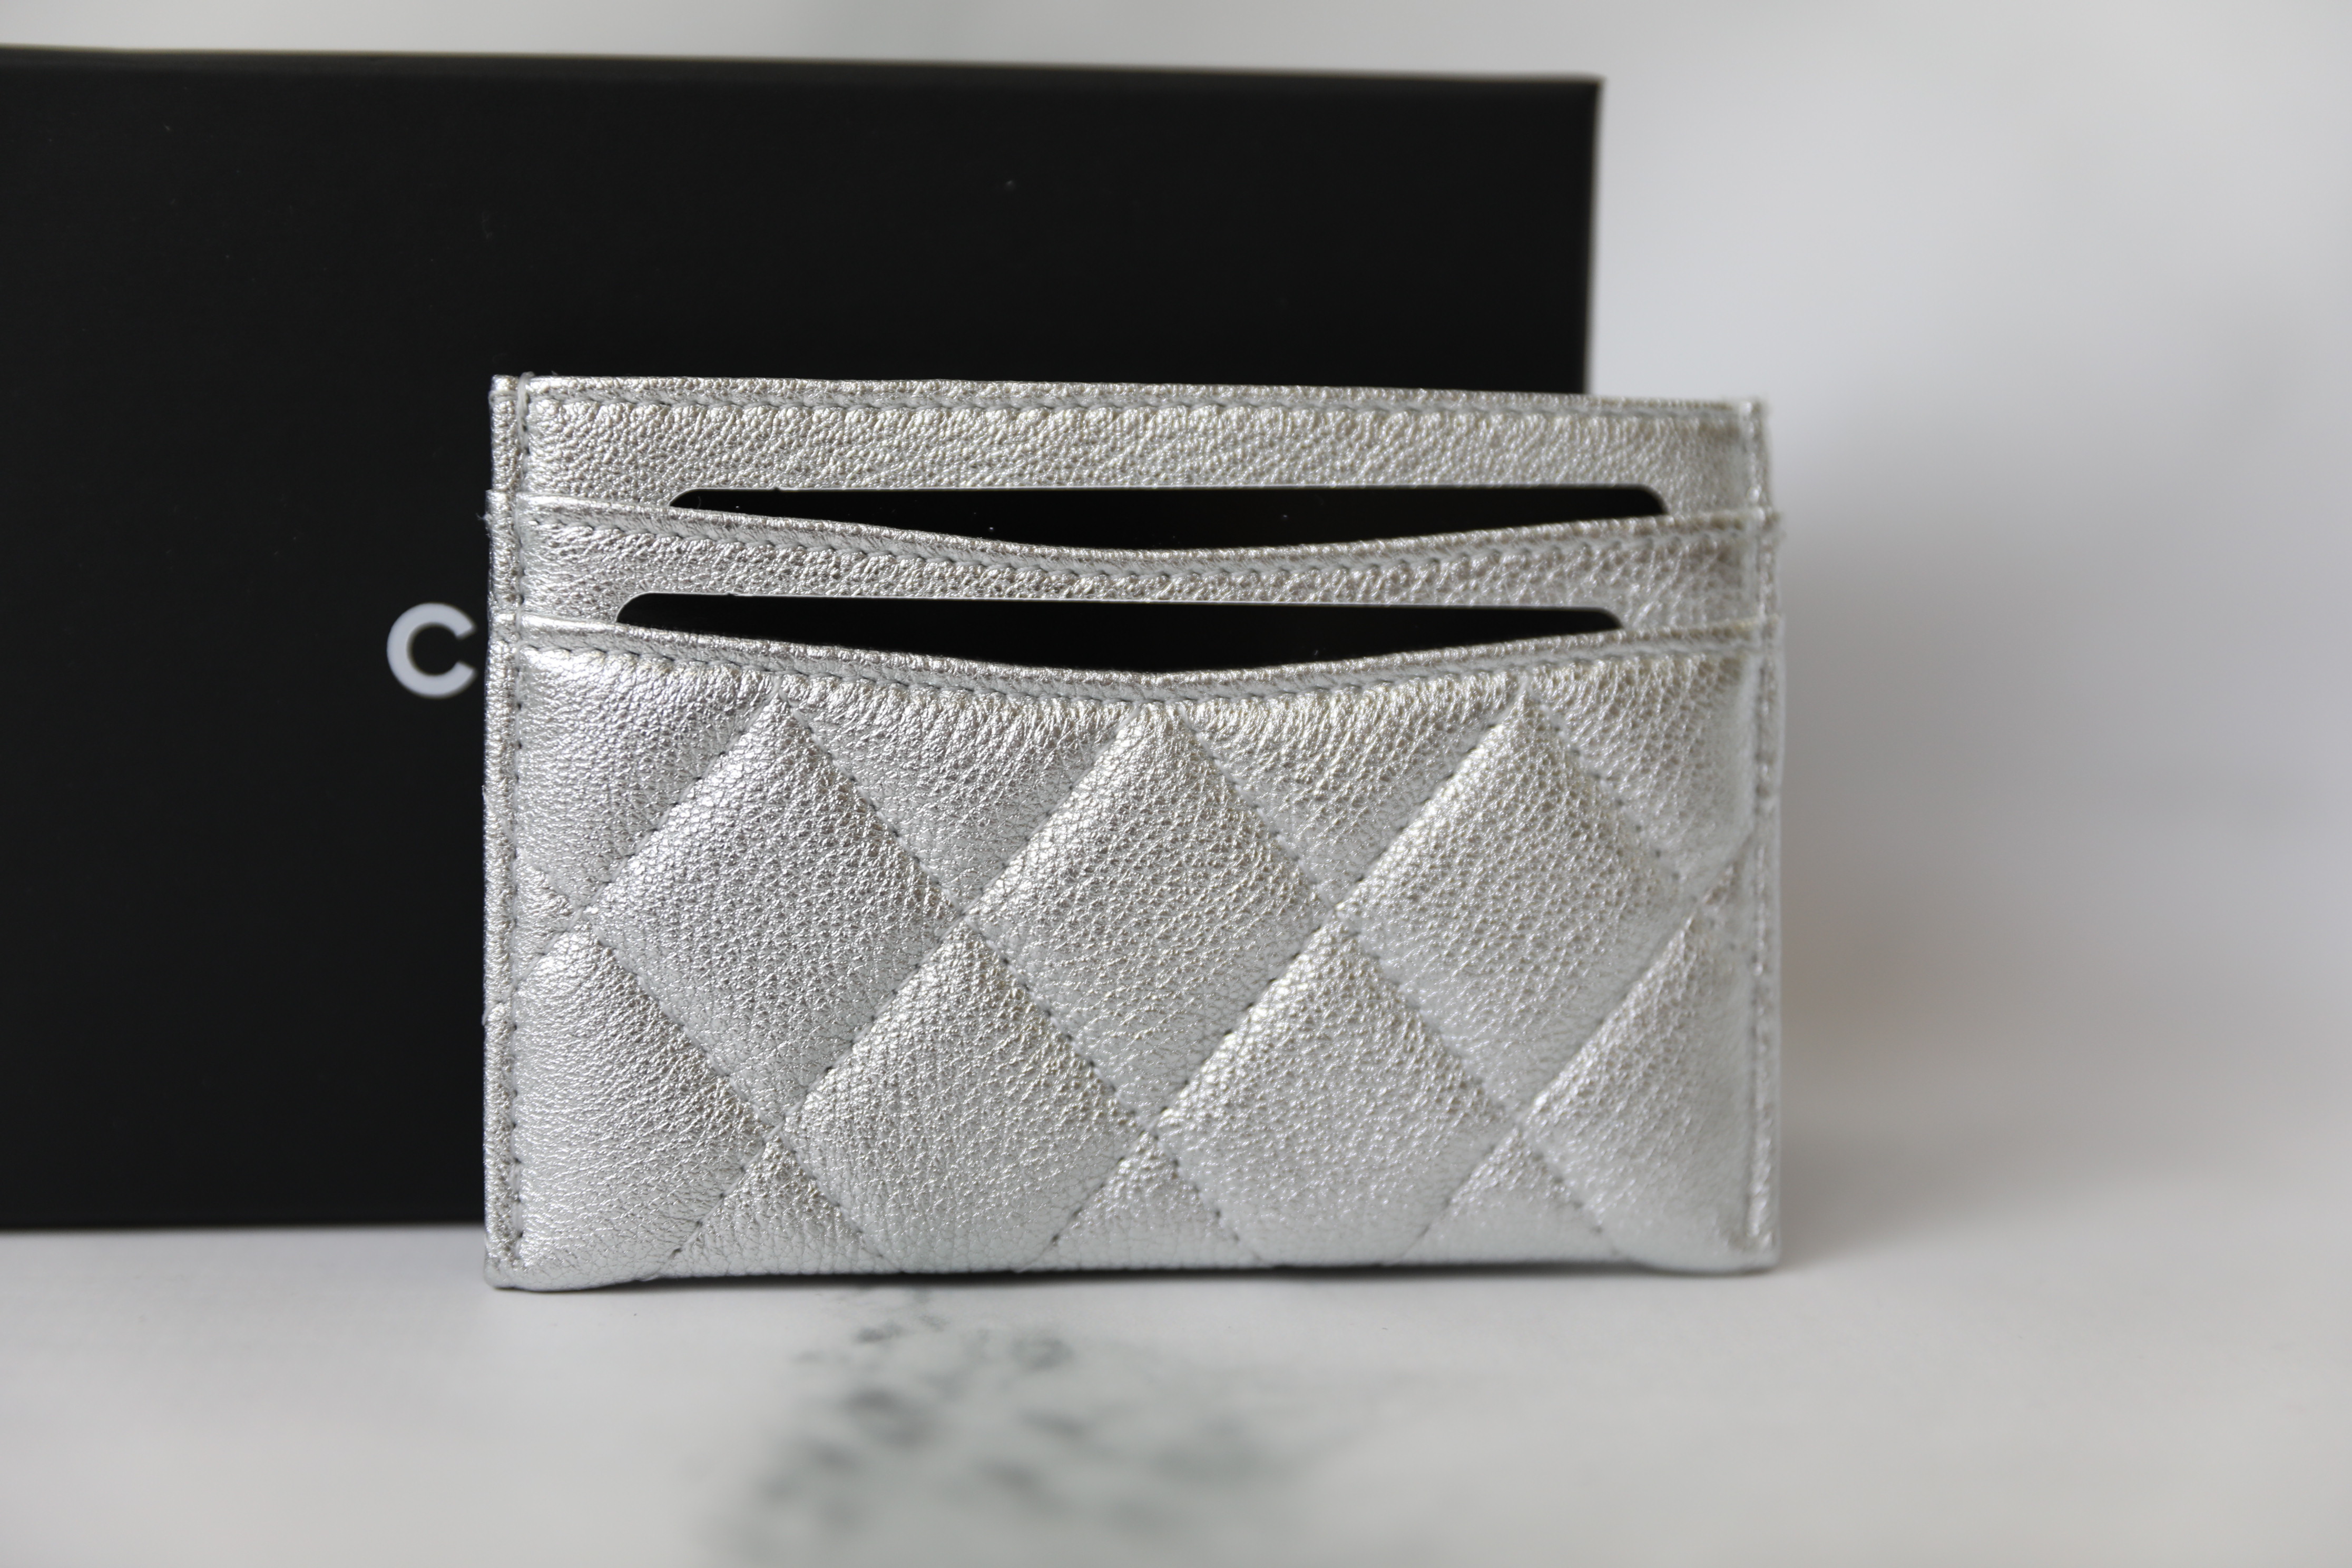 Chanel SLG Card Holder, Silver Lambskin with Silver Hardware